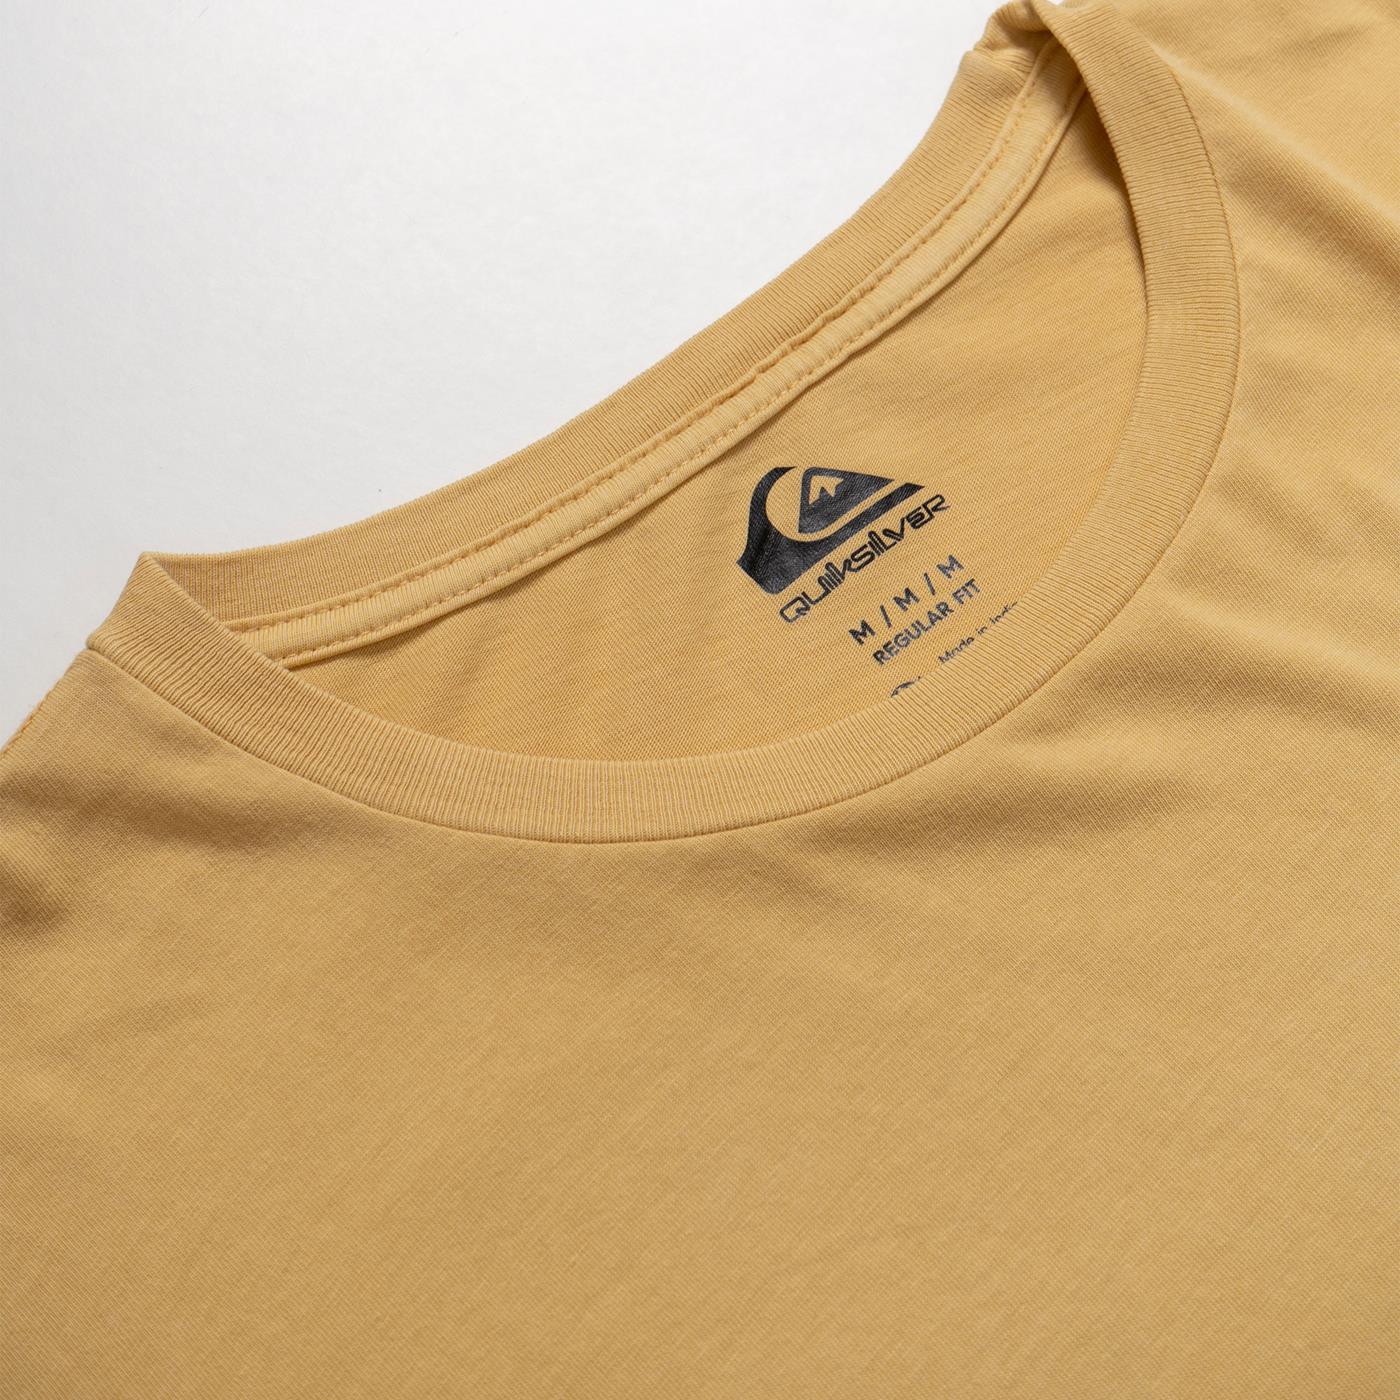 QS Bubble Stamp SS T-Shirt